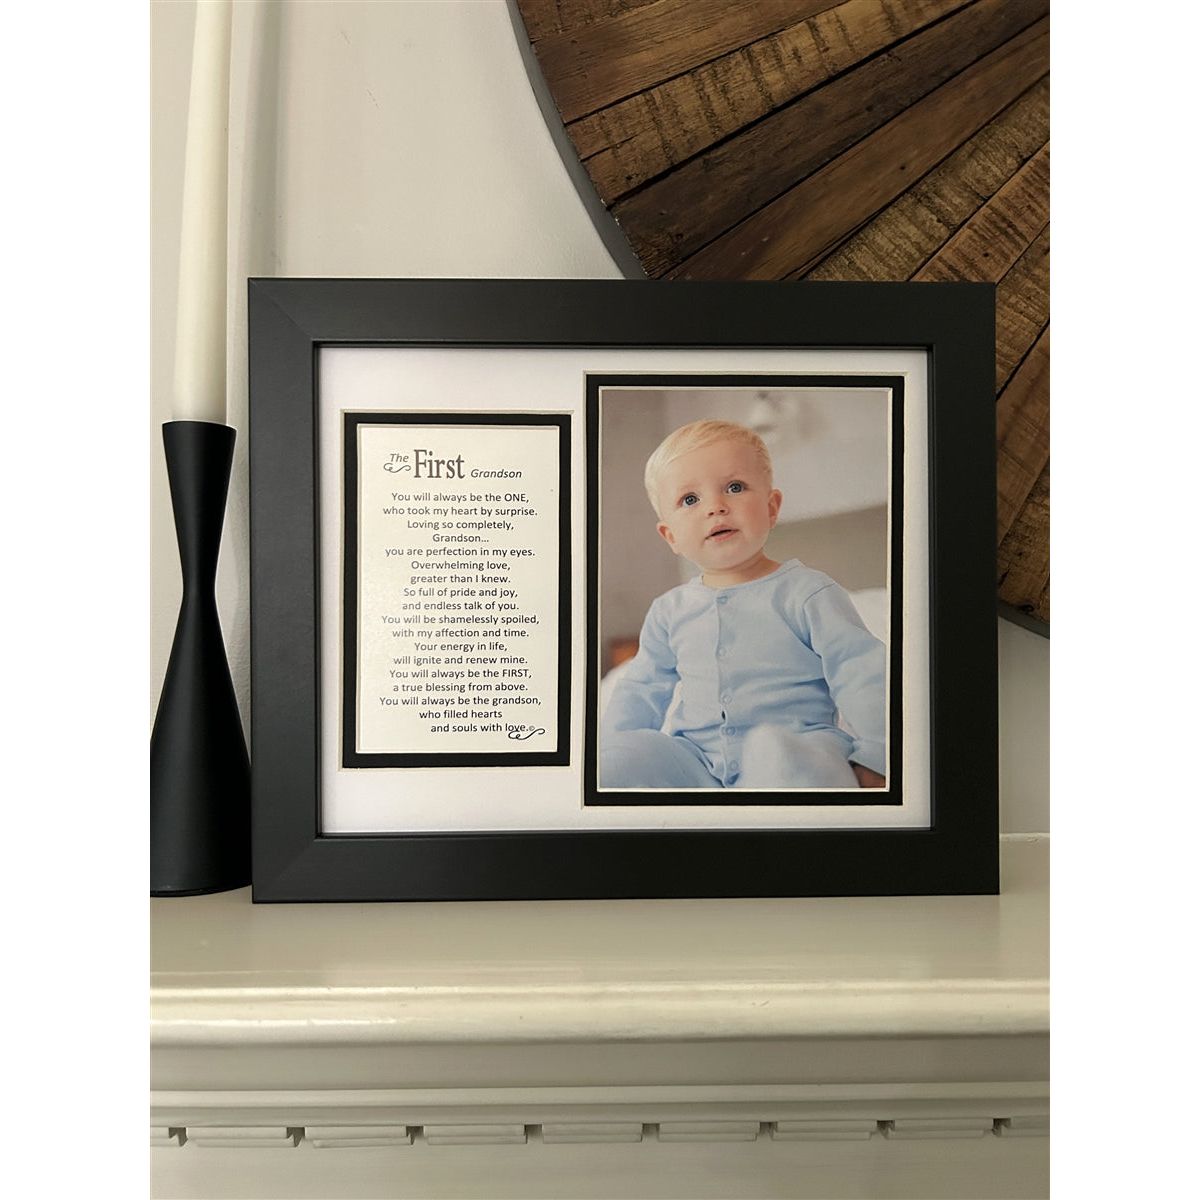 The First Grandson frame on a fireplace mantle.